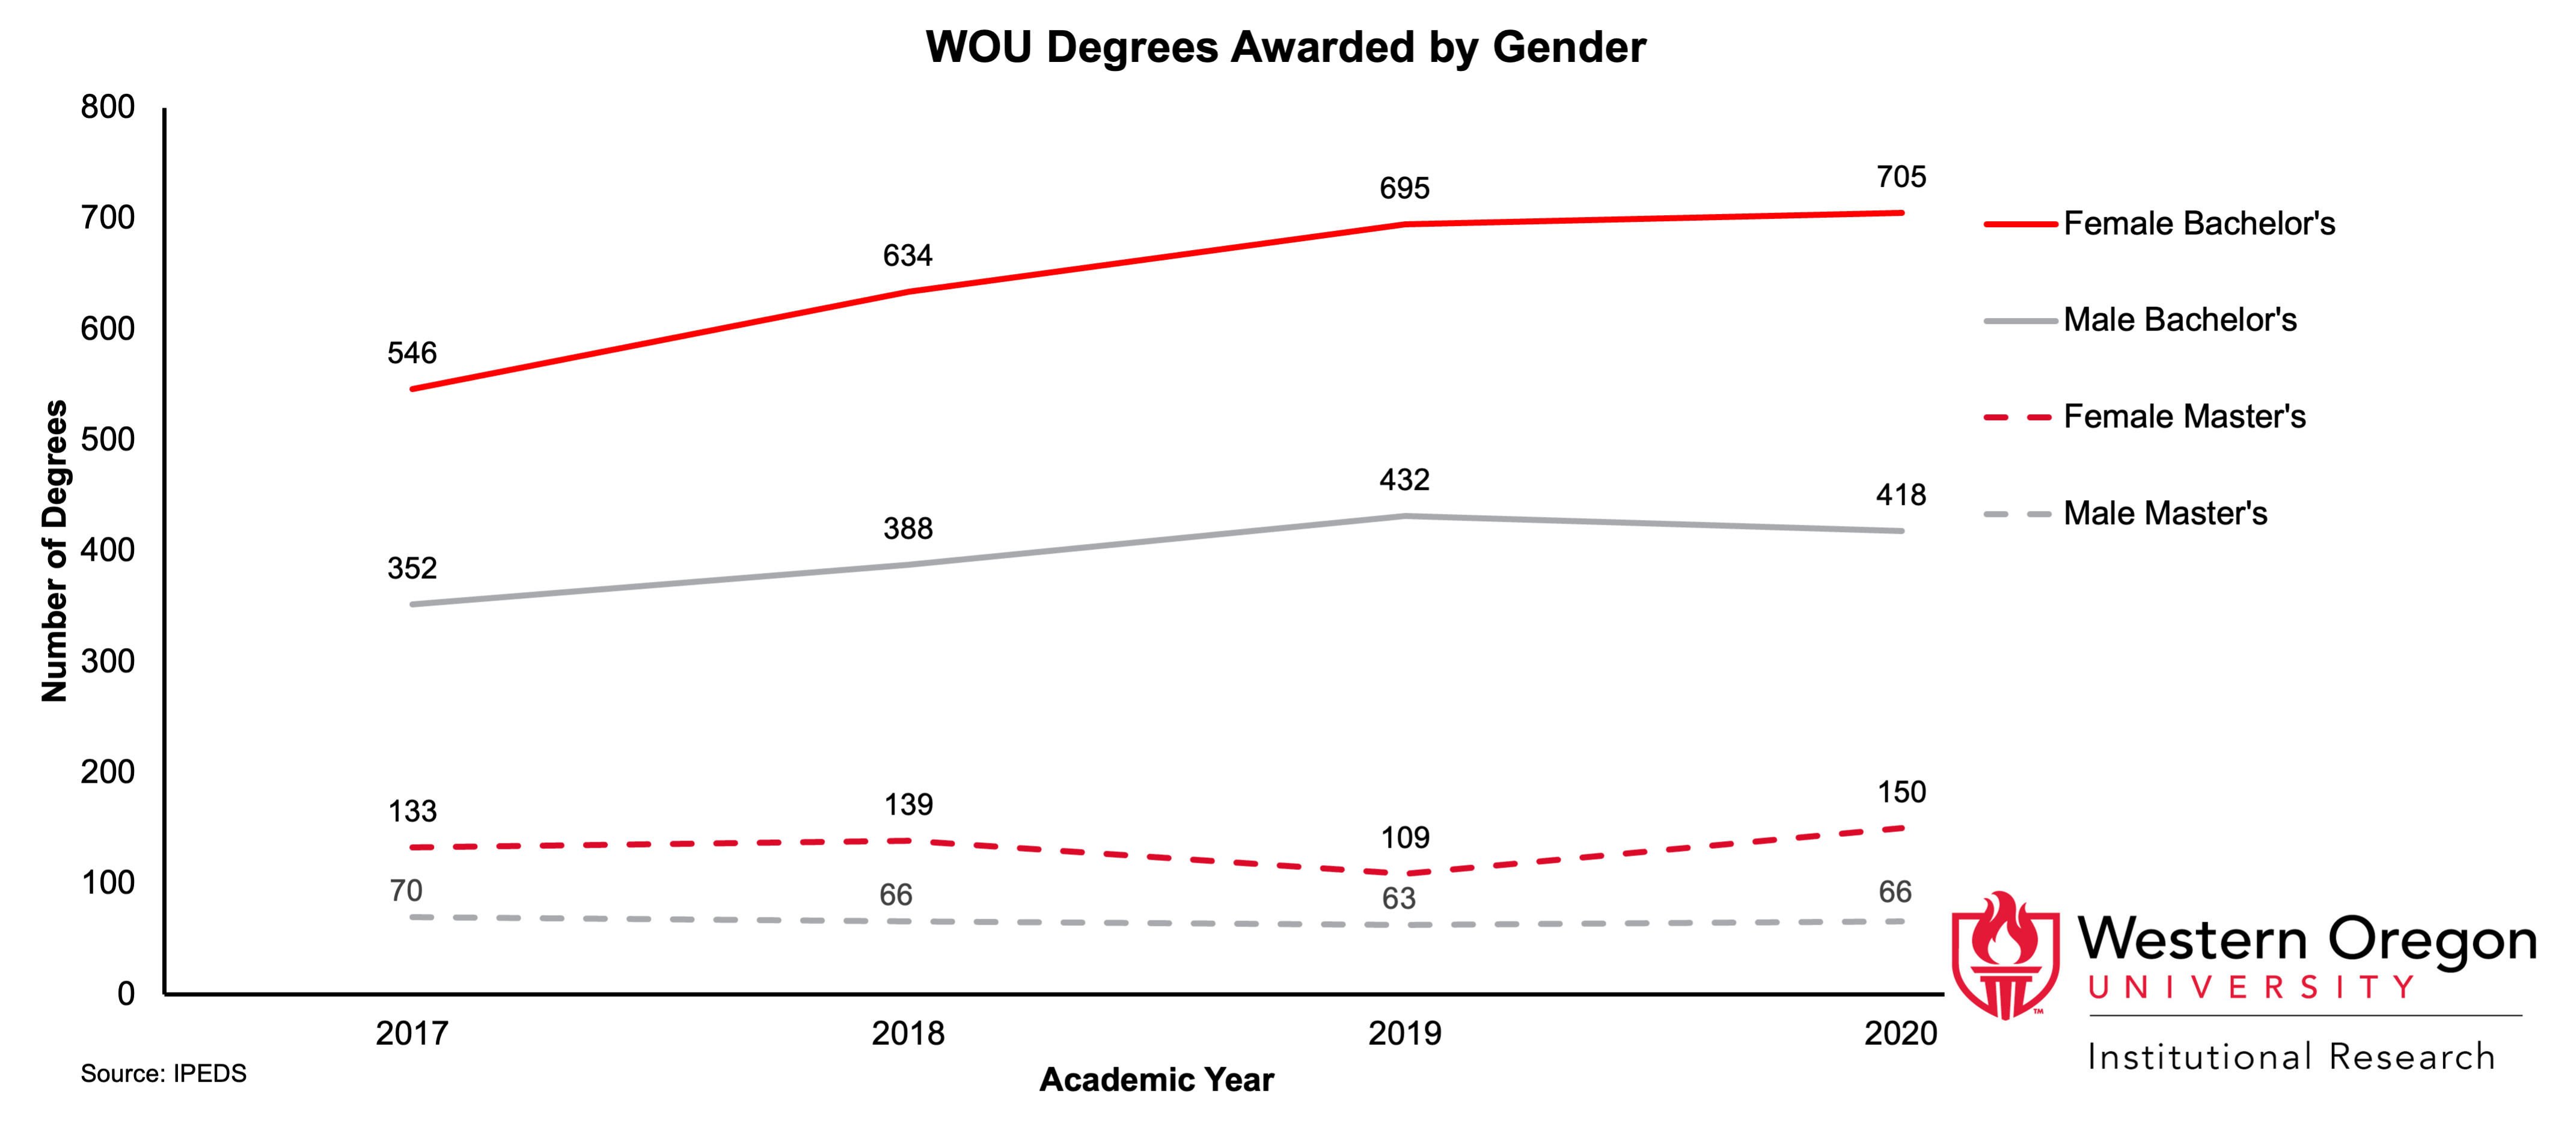 Line graph of the total number of Bachelor's and Master's degrees awarded at WOU between 2017 and 2020, broken out by sex, showing that females are awarded a larger share of the total number of degrees than males